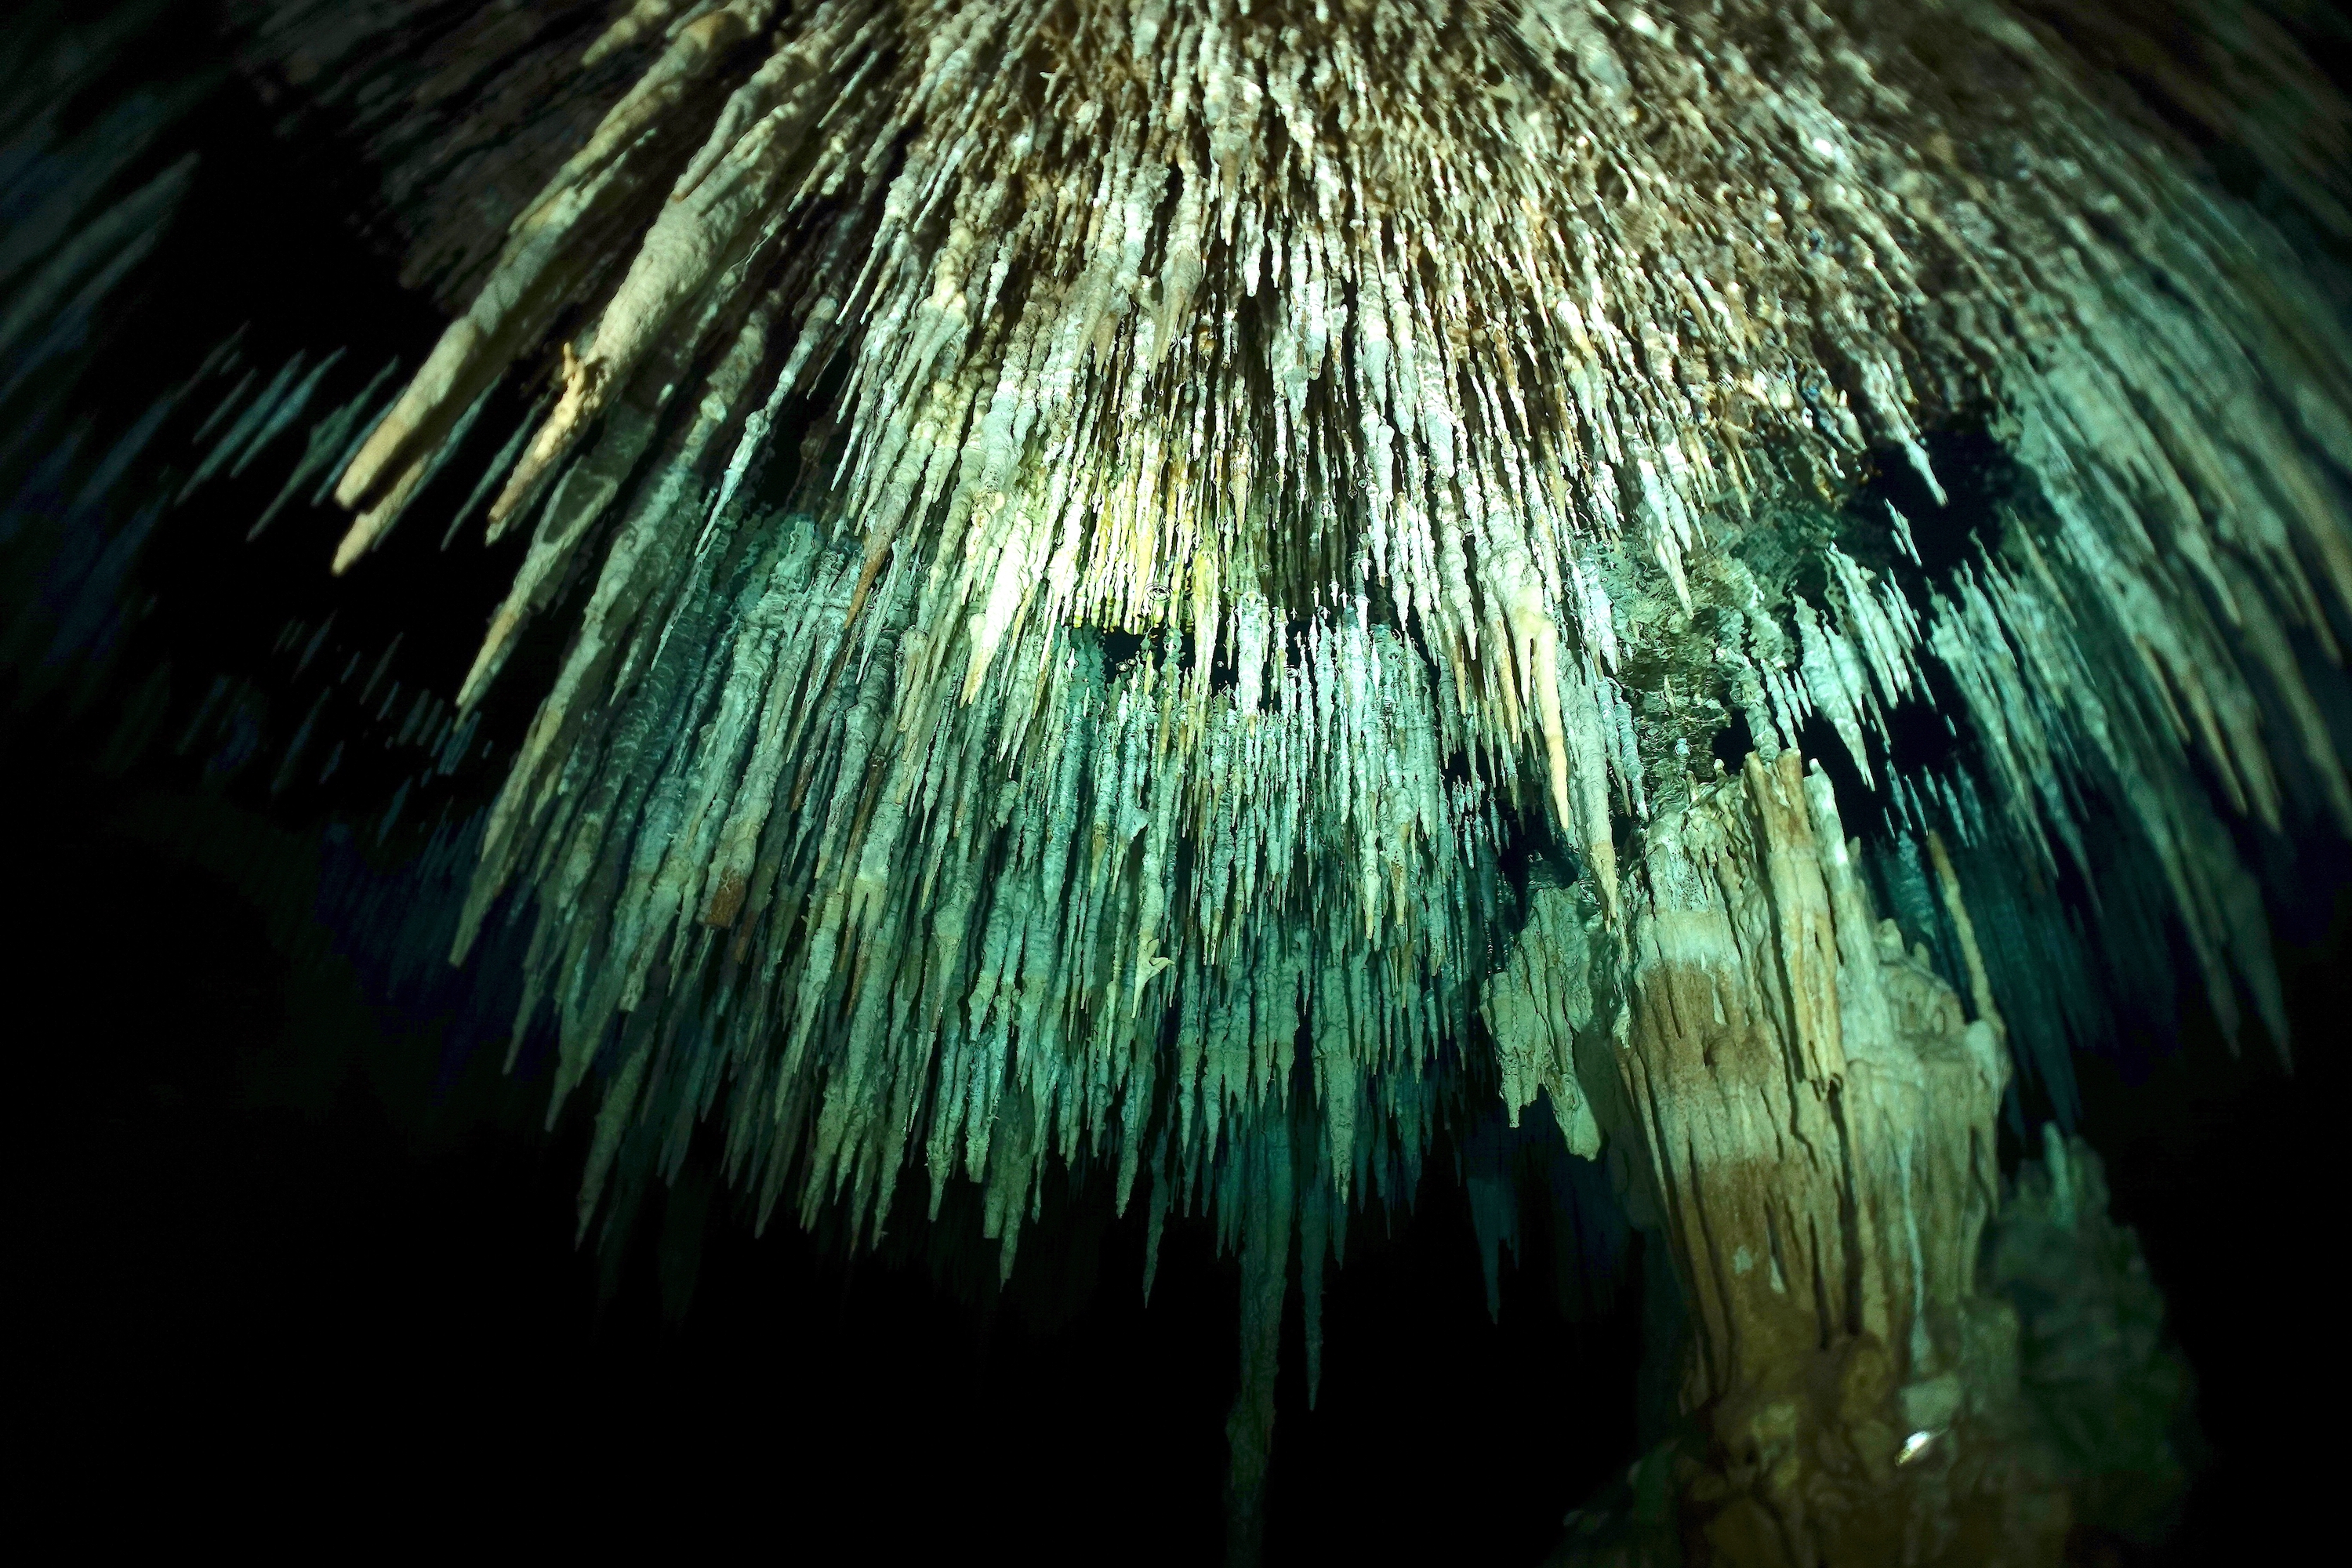 Shower of stalactites and a pillar in Dreamgate cenote. Photo by Pierre Constant